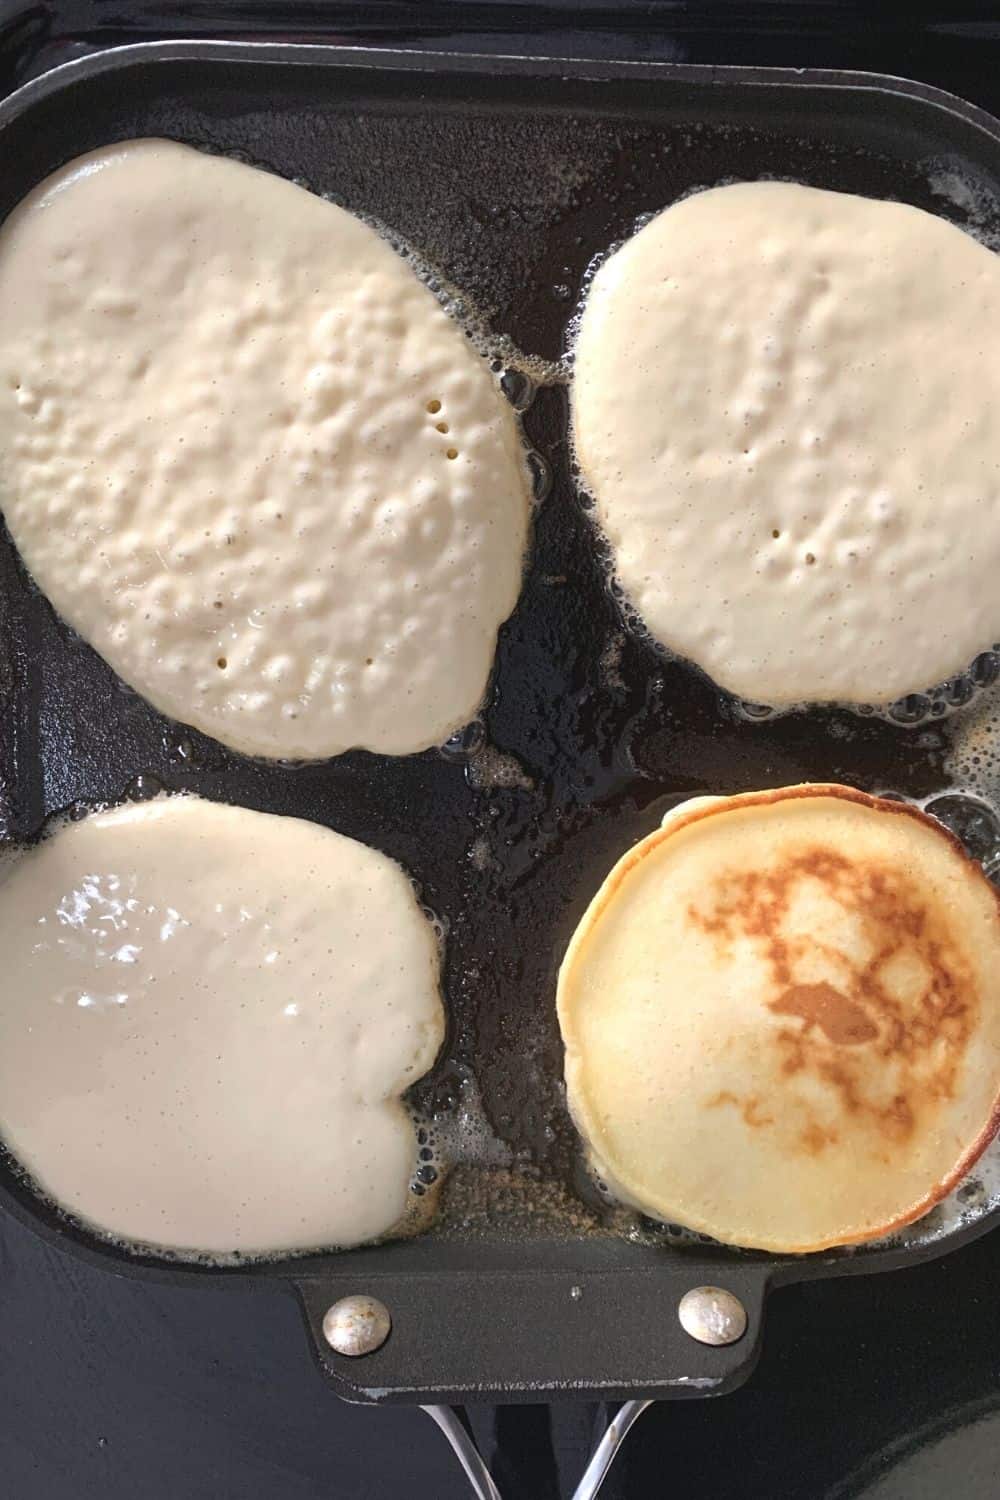 pancakes made with self-raising flour being cooked on a griddle